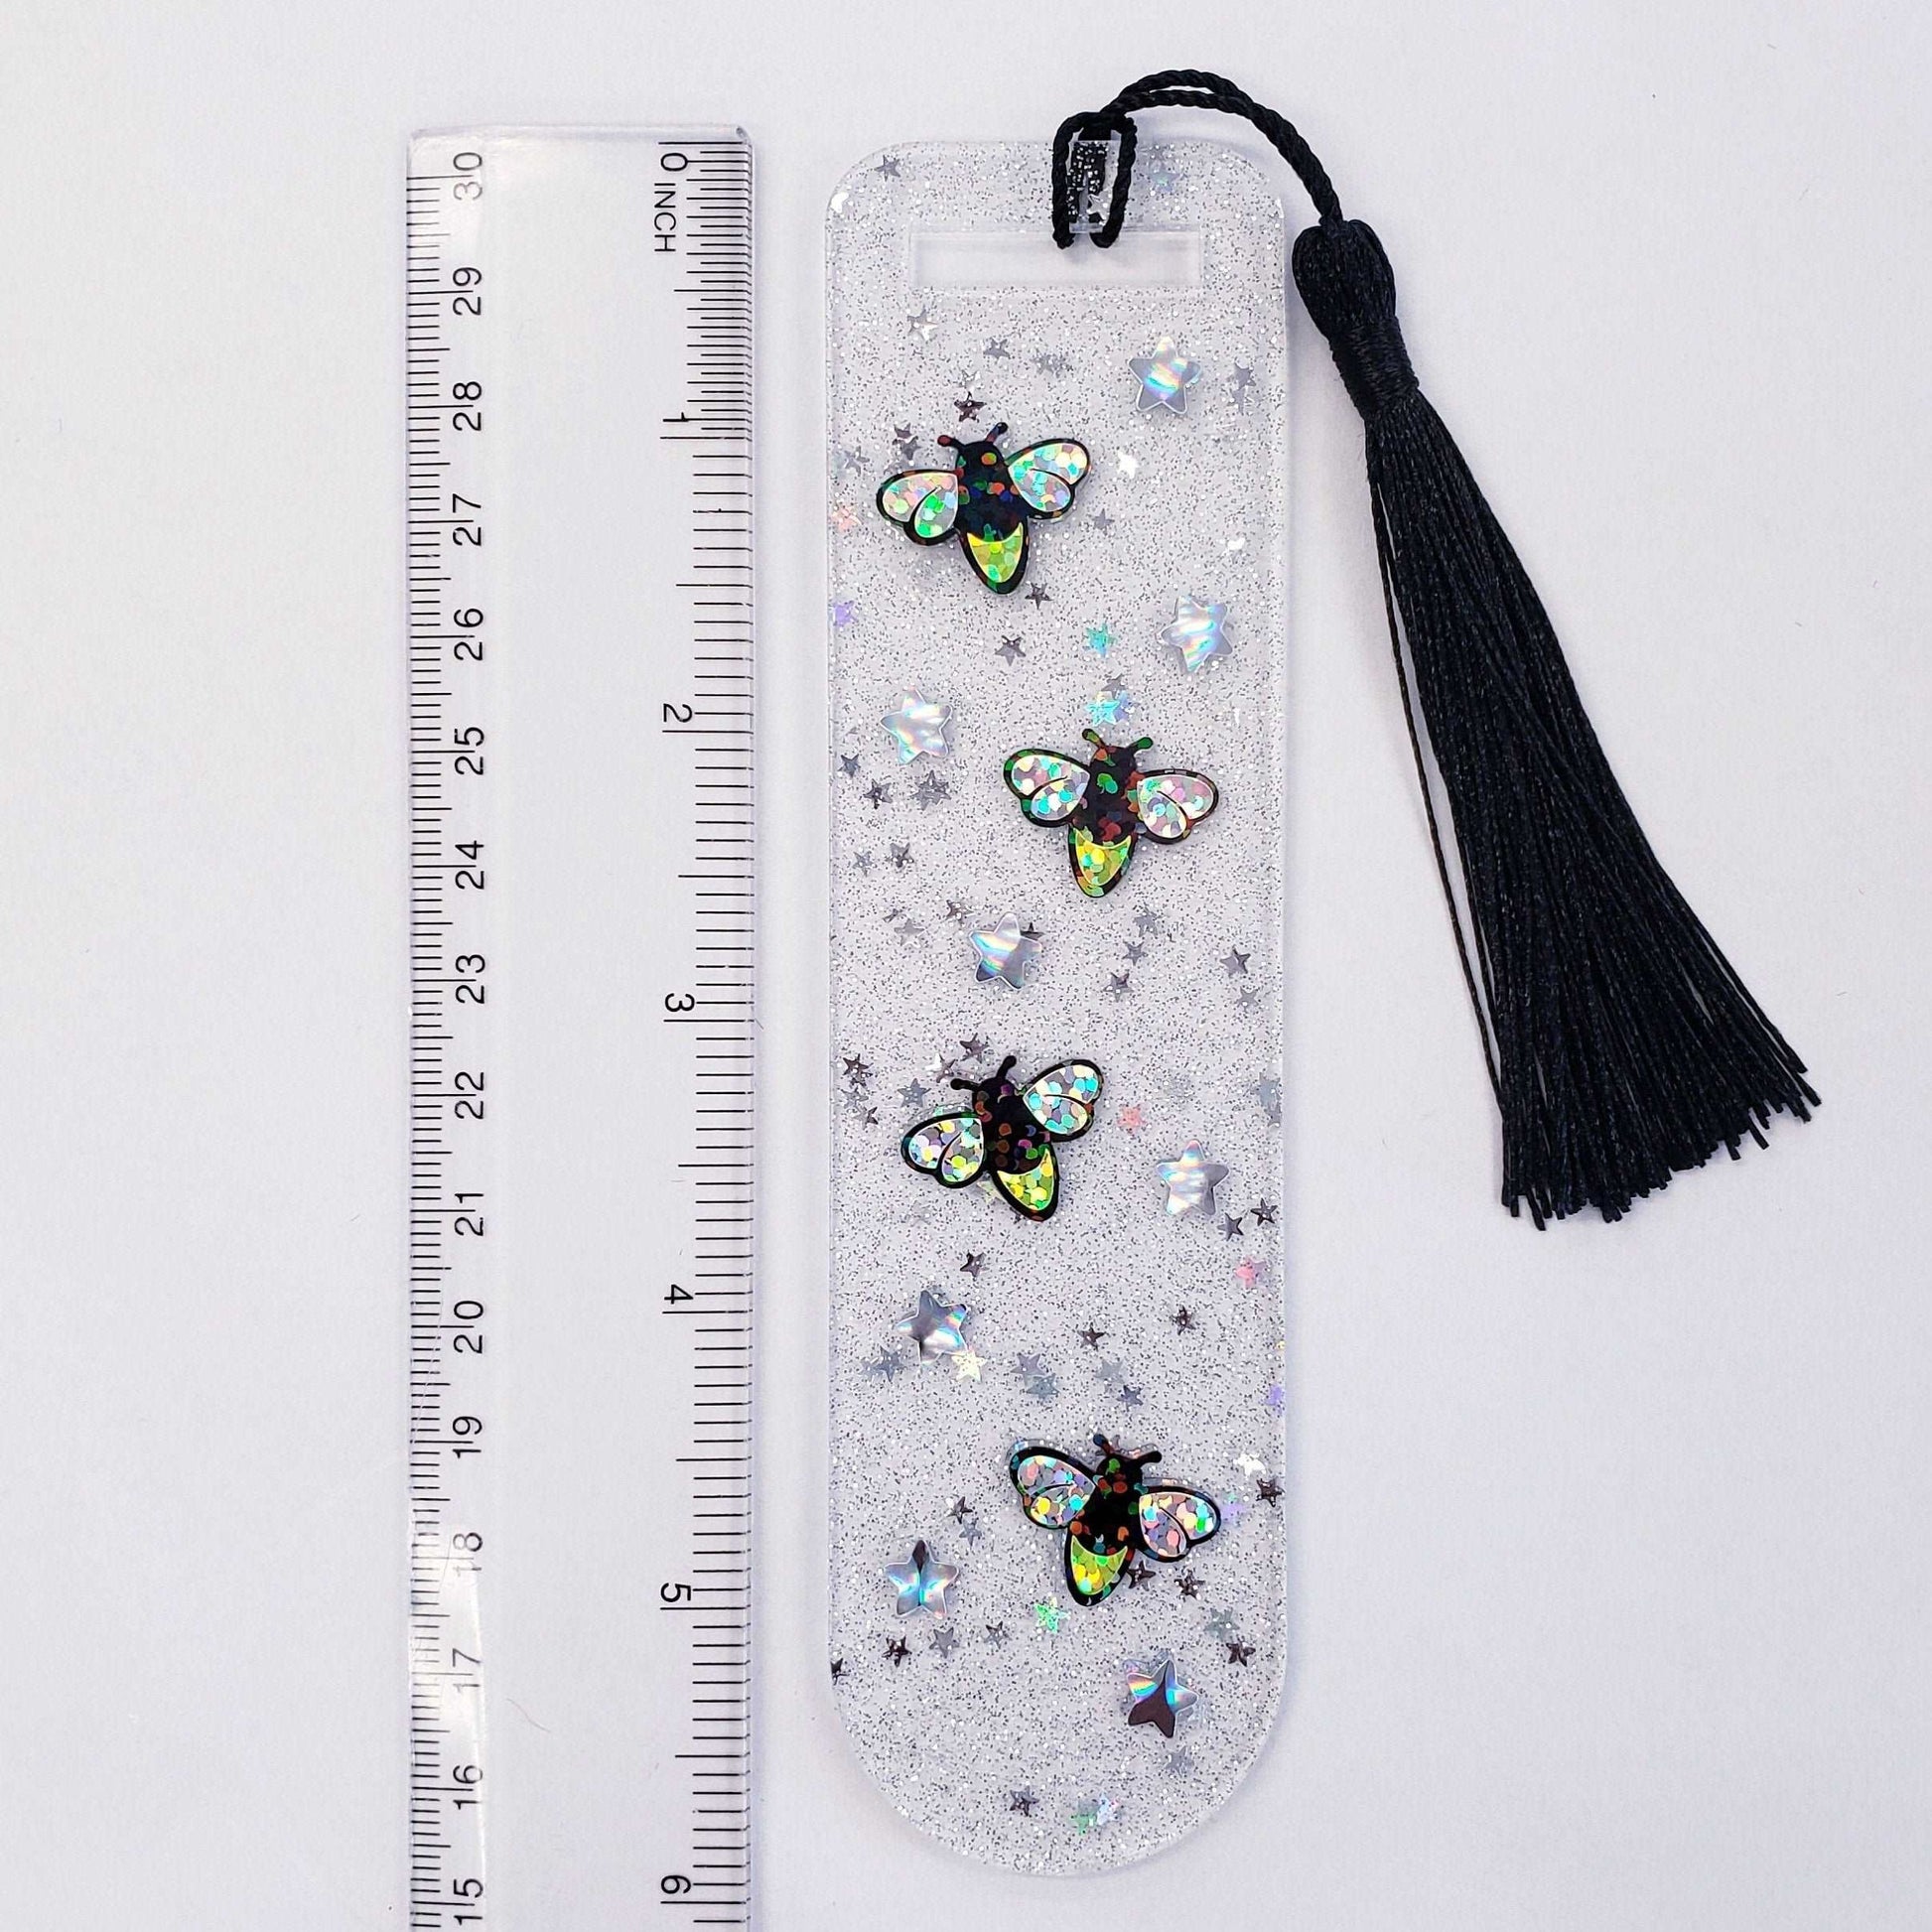 Firefly Bookmark, small gift for booklovers, clear acrylic plastic page holder with black tassel and firefly graphics